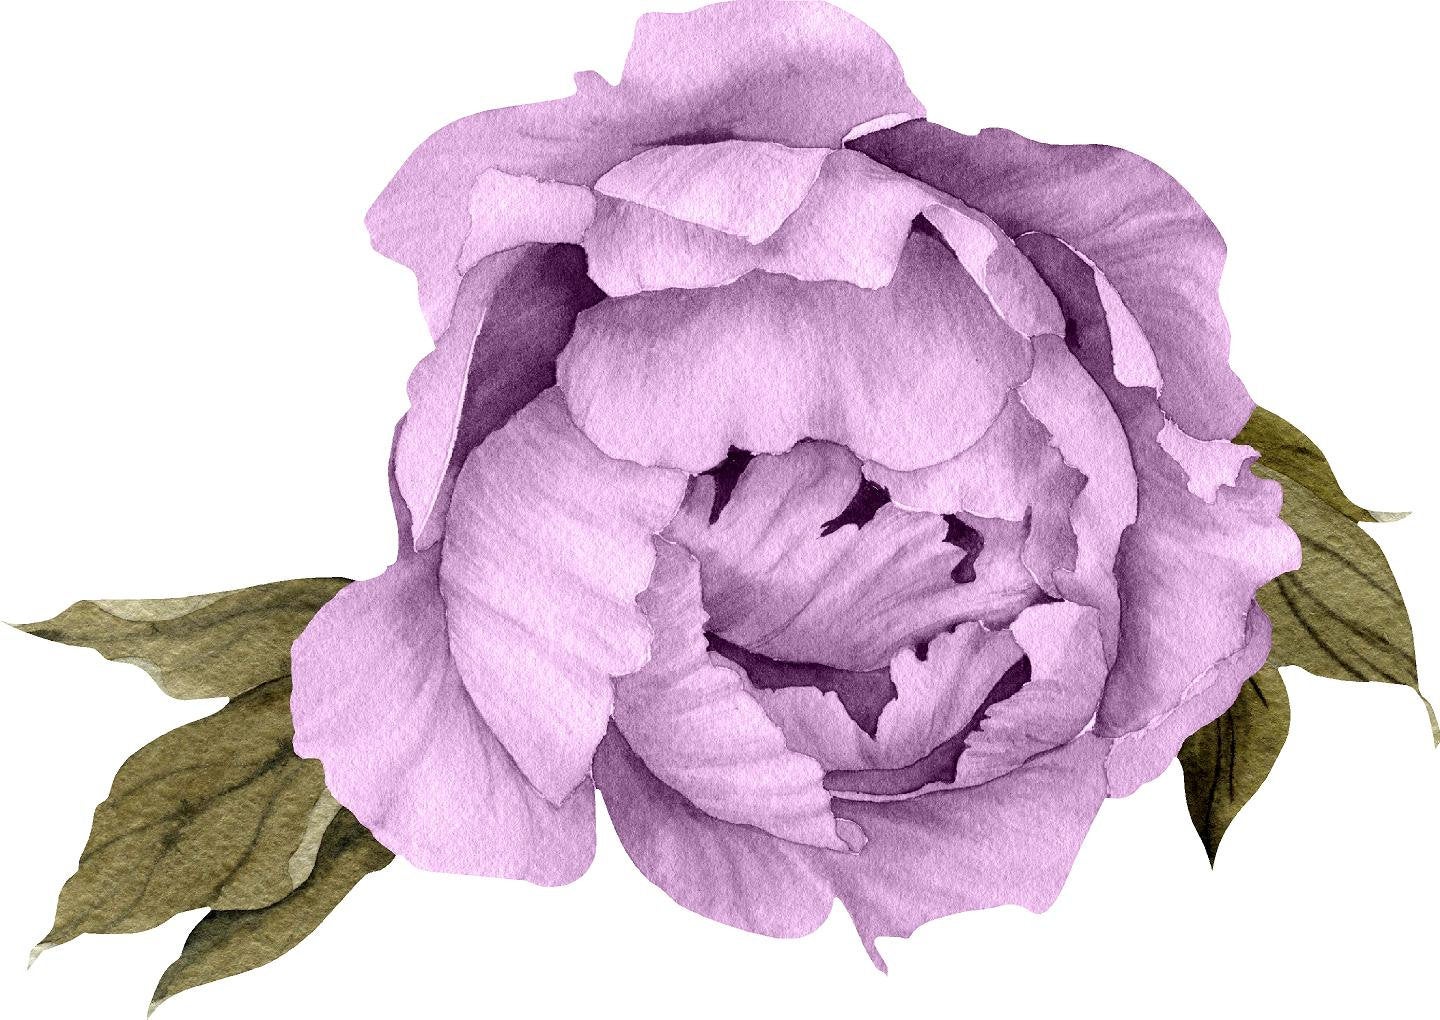 Purple Peony #16 with Leaves Wall Decal Removable Fabric Vinyl Flower Wall Sticker for Baby Girl Floral Nursery Room Decor